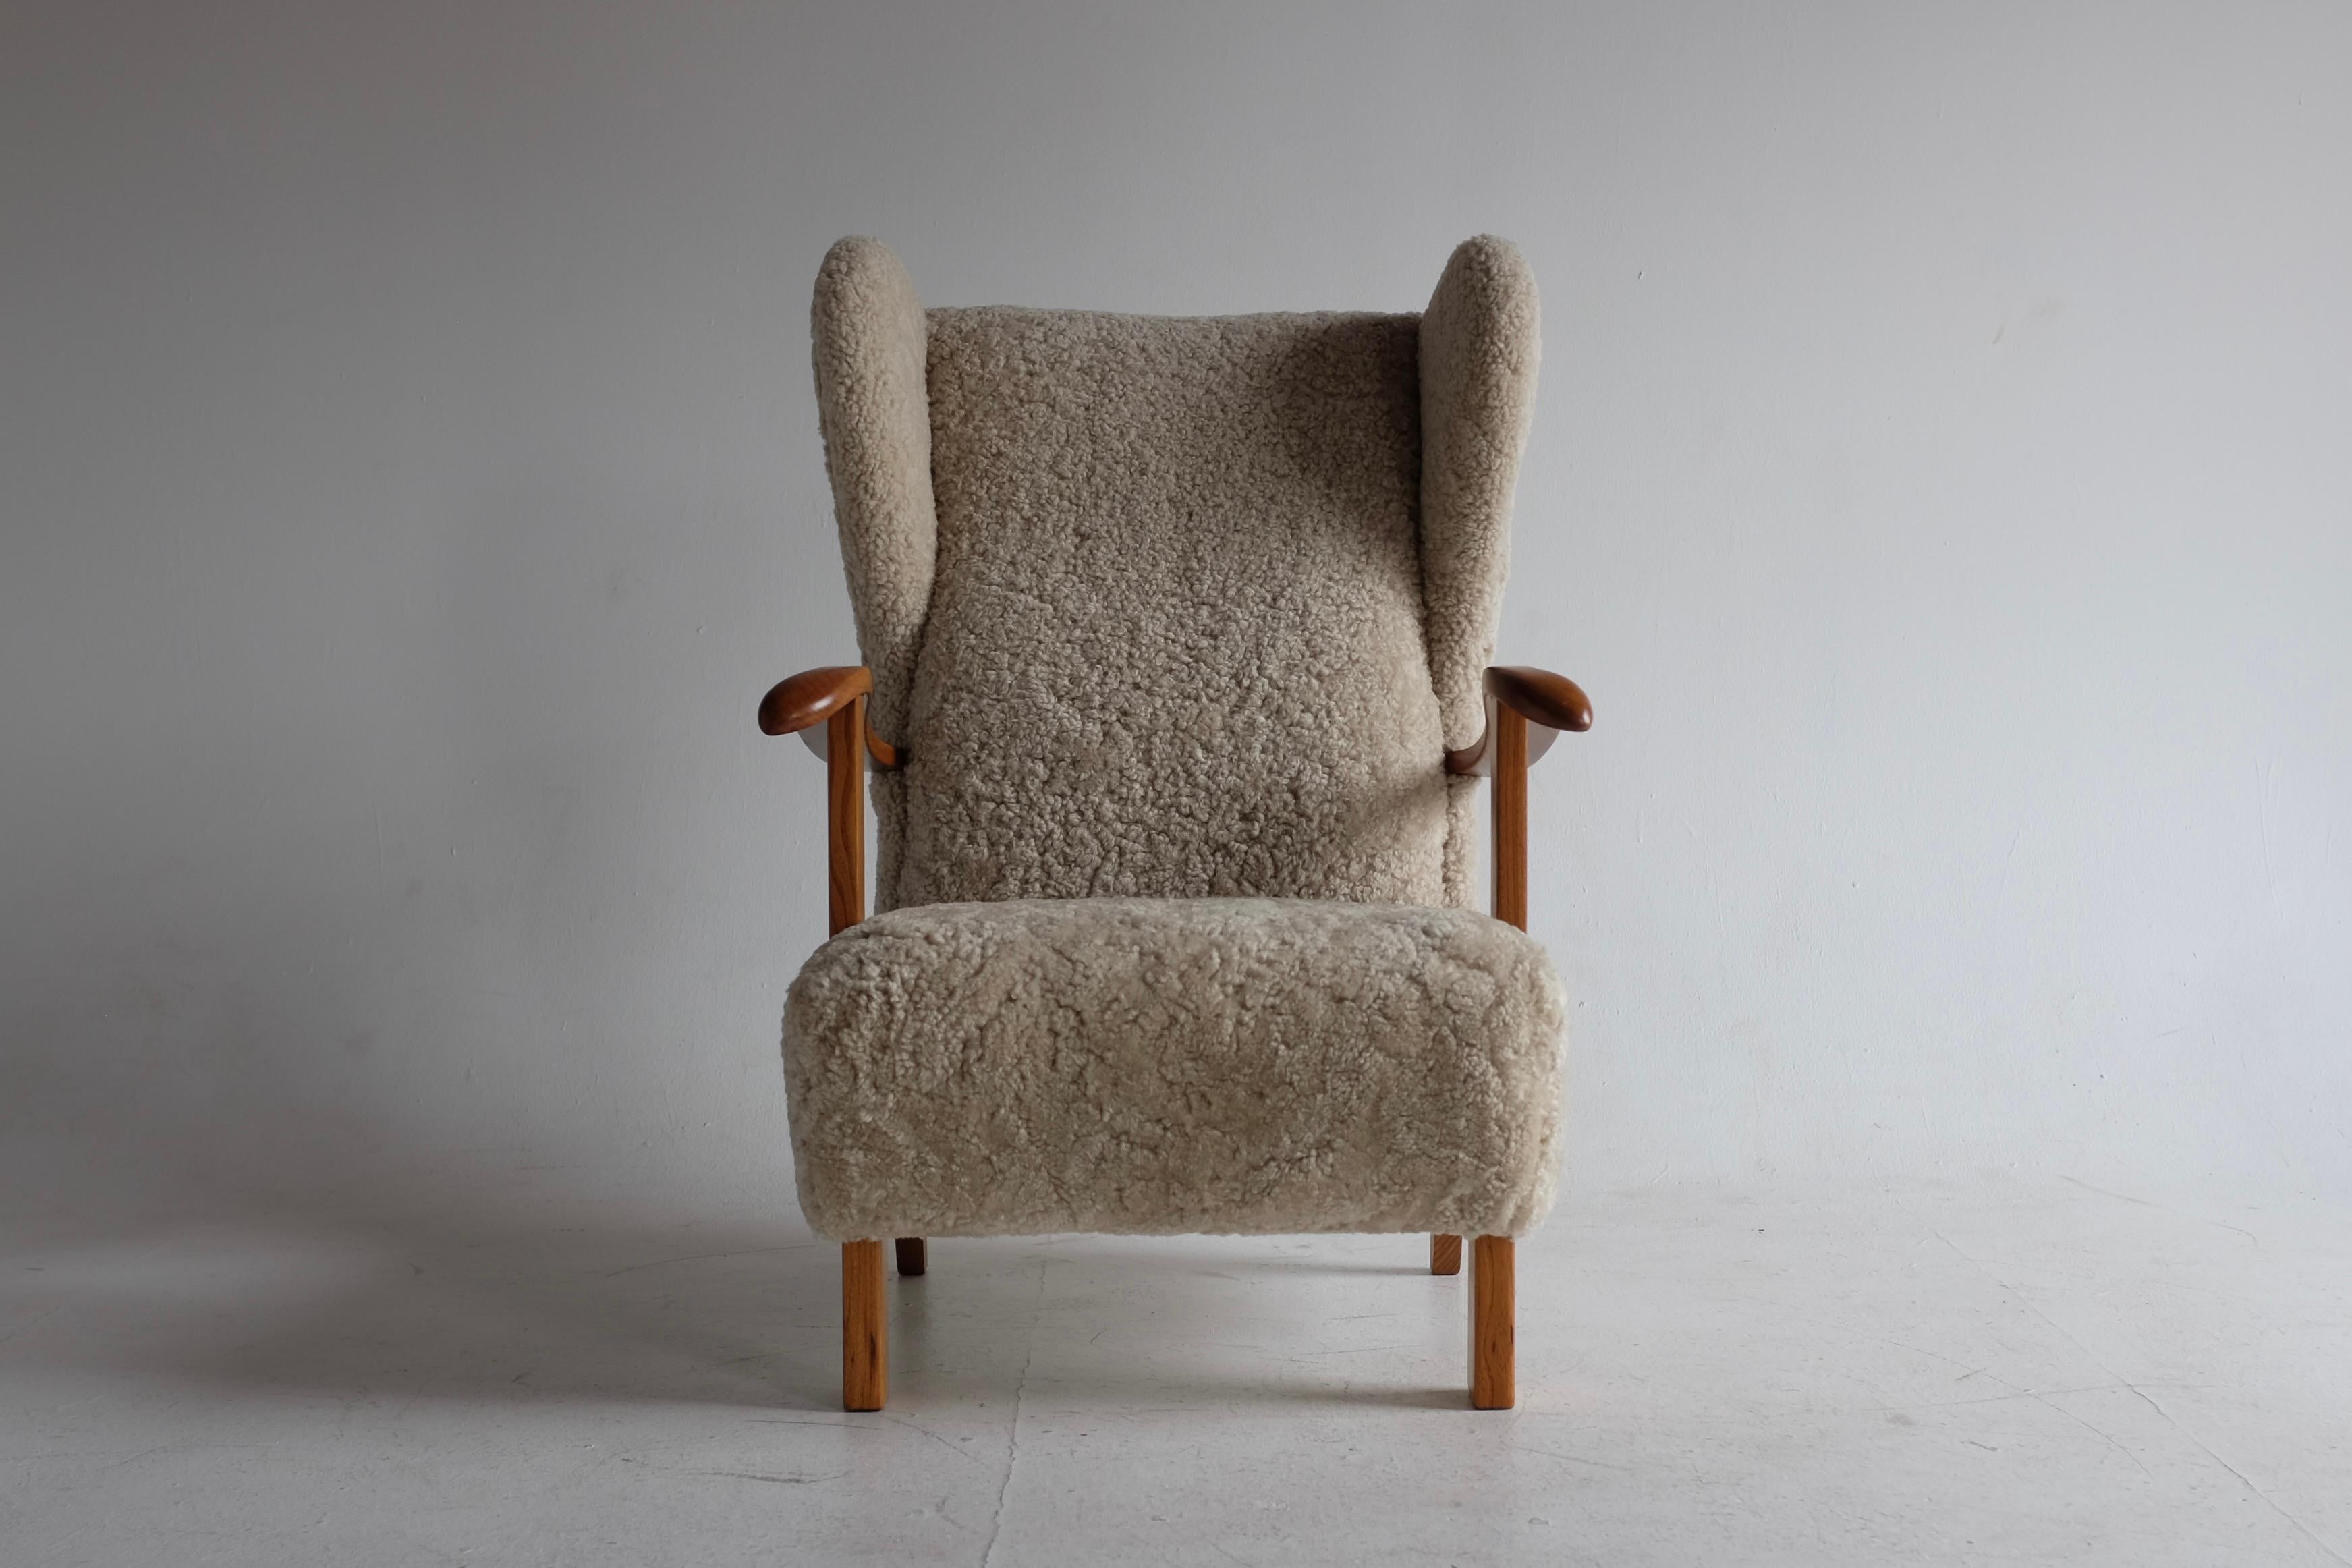 1940s Wingback lounge chair model 1582 by Fritz Hansen, Denmark. Newly upholstered in Scandilock sheepskin. Curved armrests in oak adds a soft look to this chair and the wood is showing a beautiful wood grain. In very good condition.

Country: